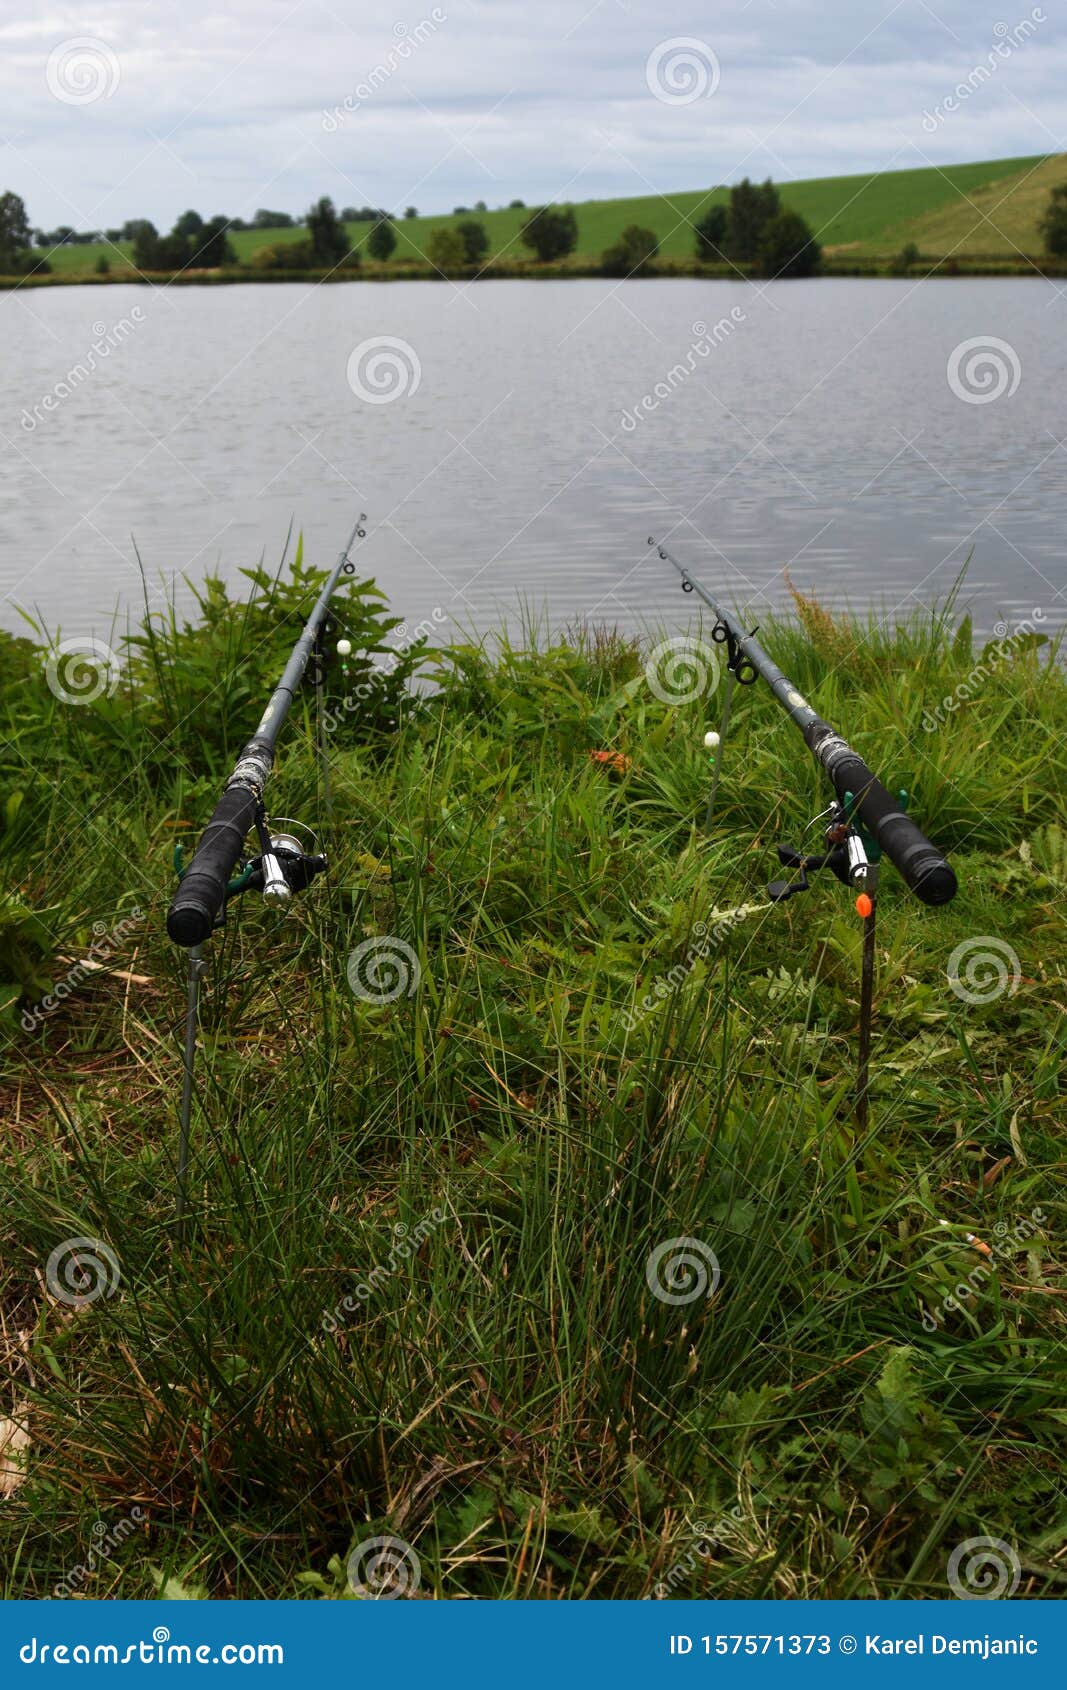 Fishing rods on the holder stock image. Image of reel - 157571373